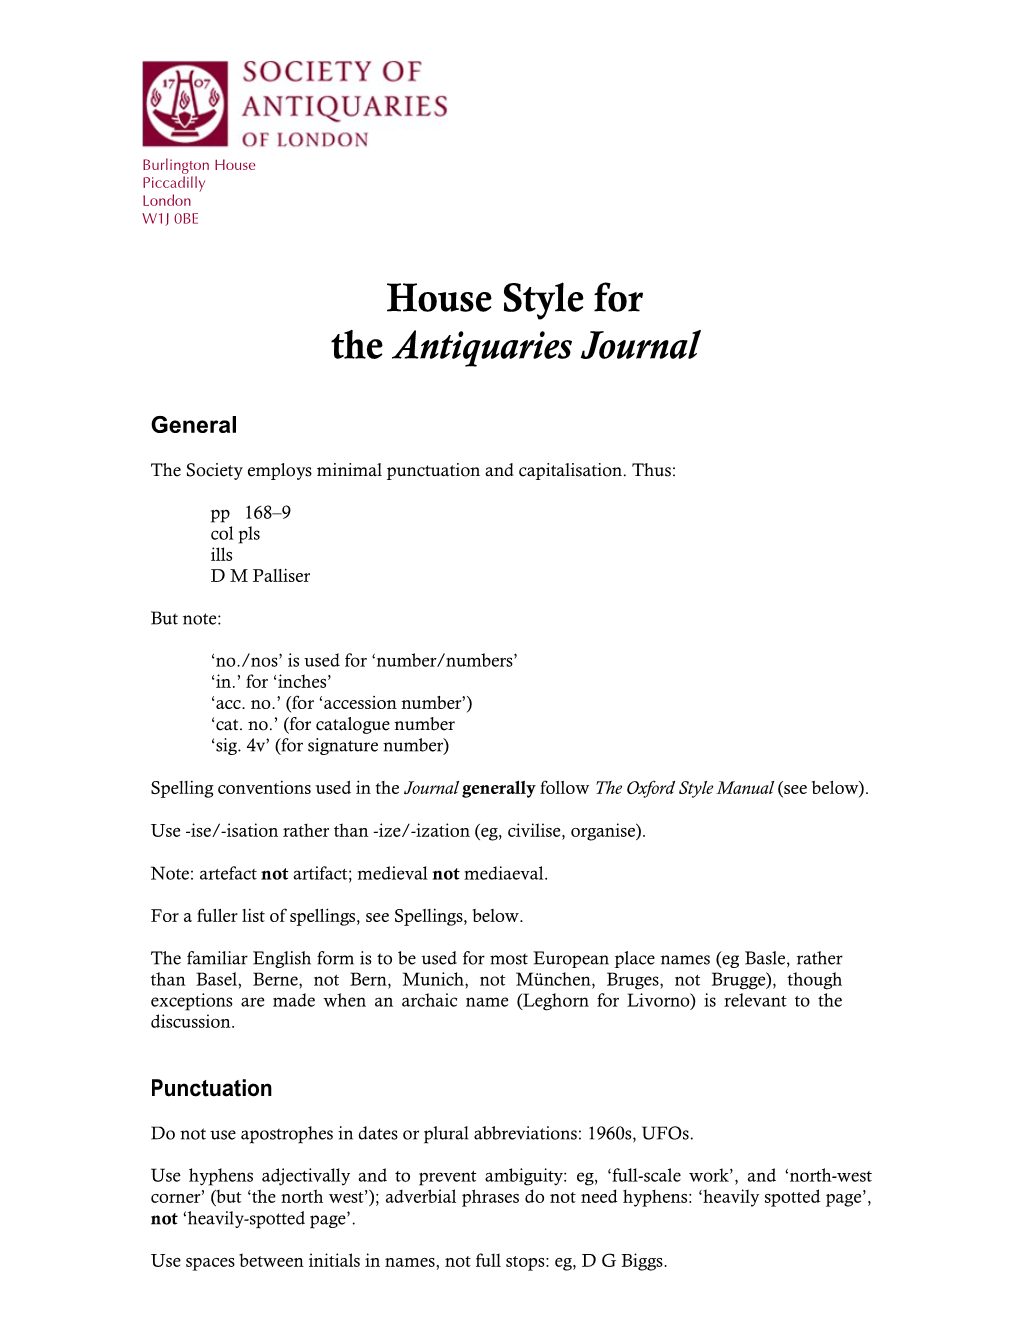 House Style for the Antiquaries Journal